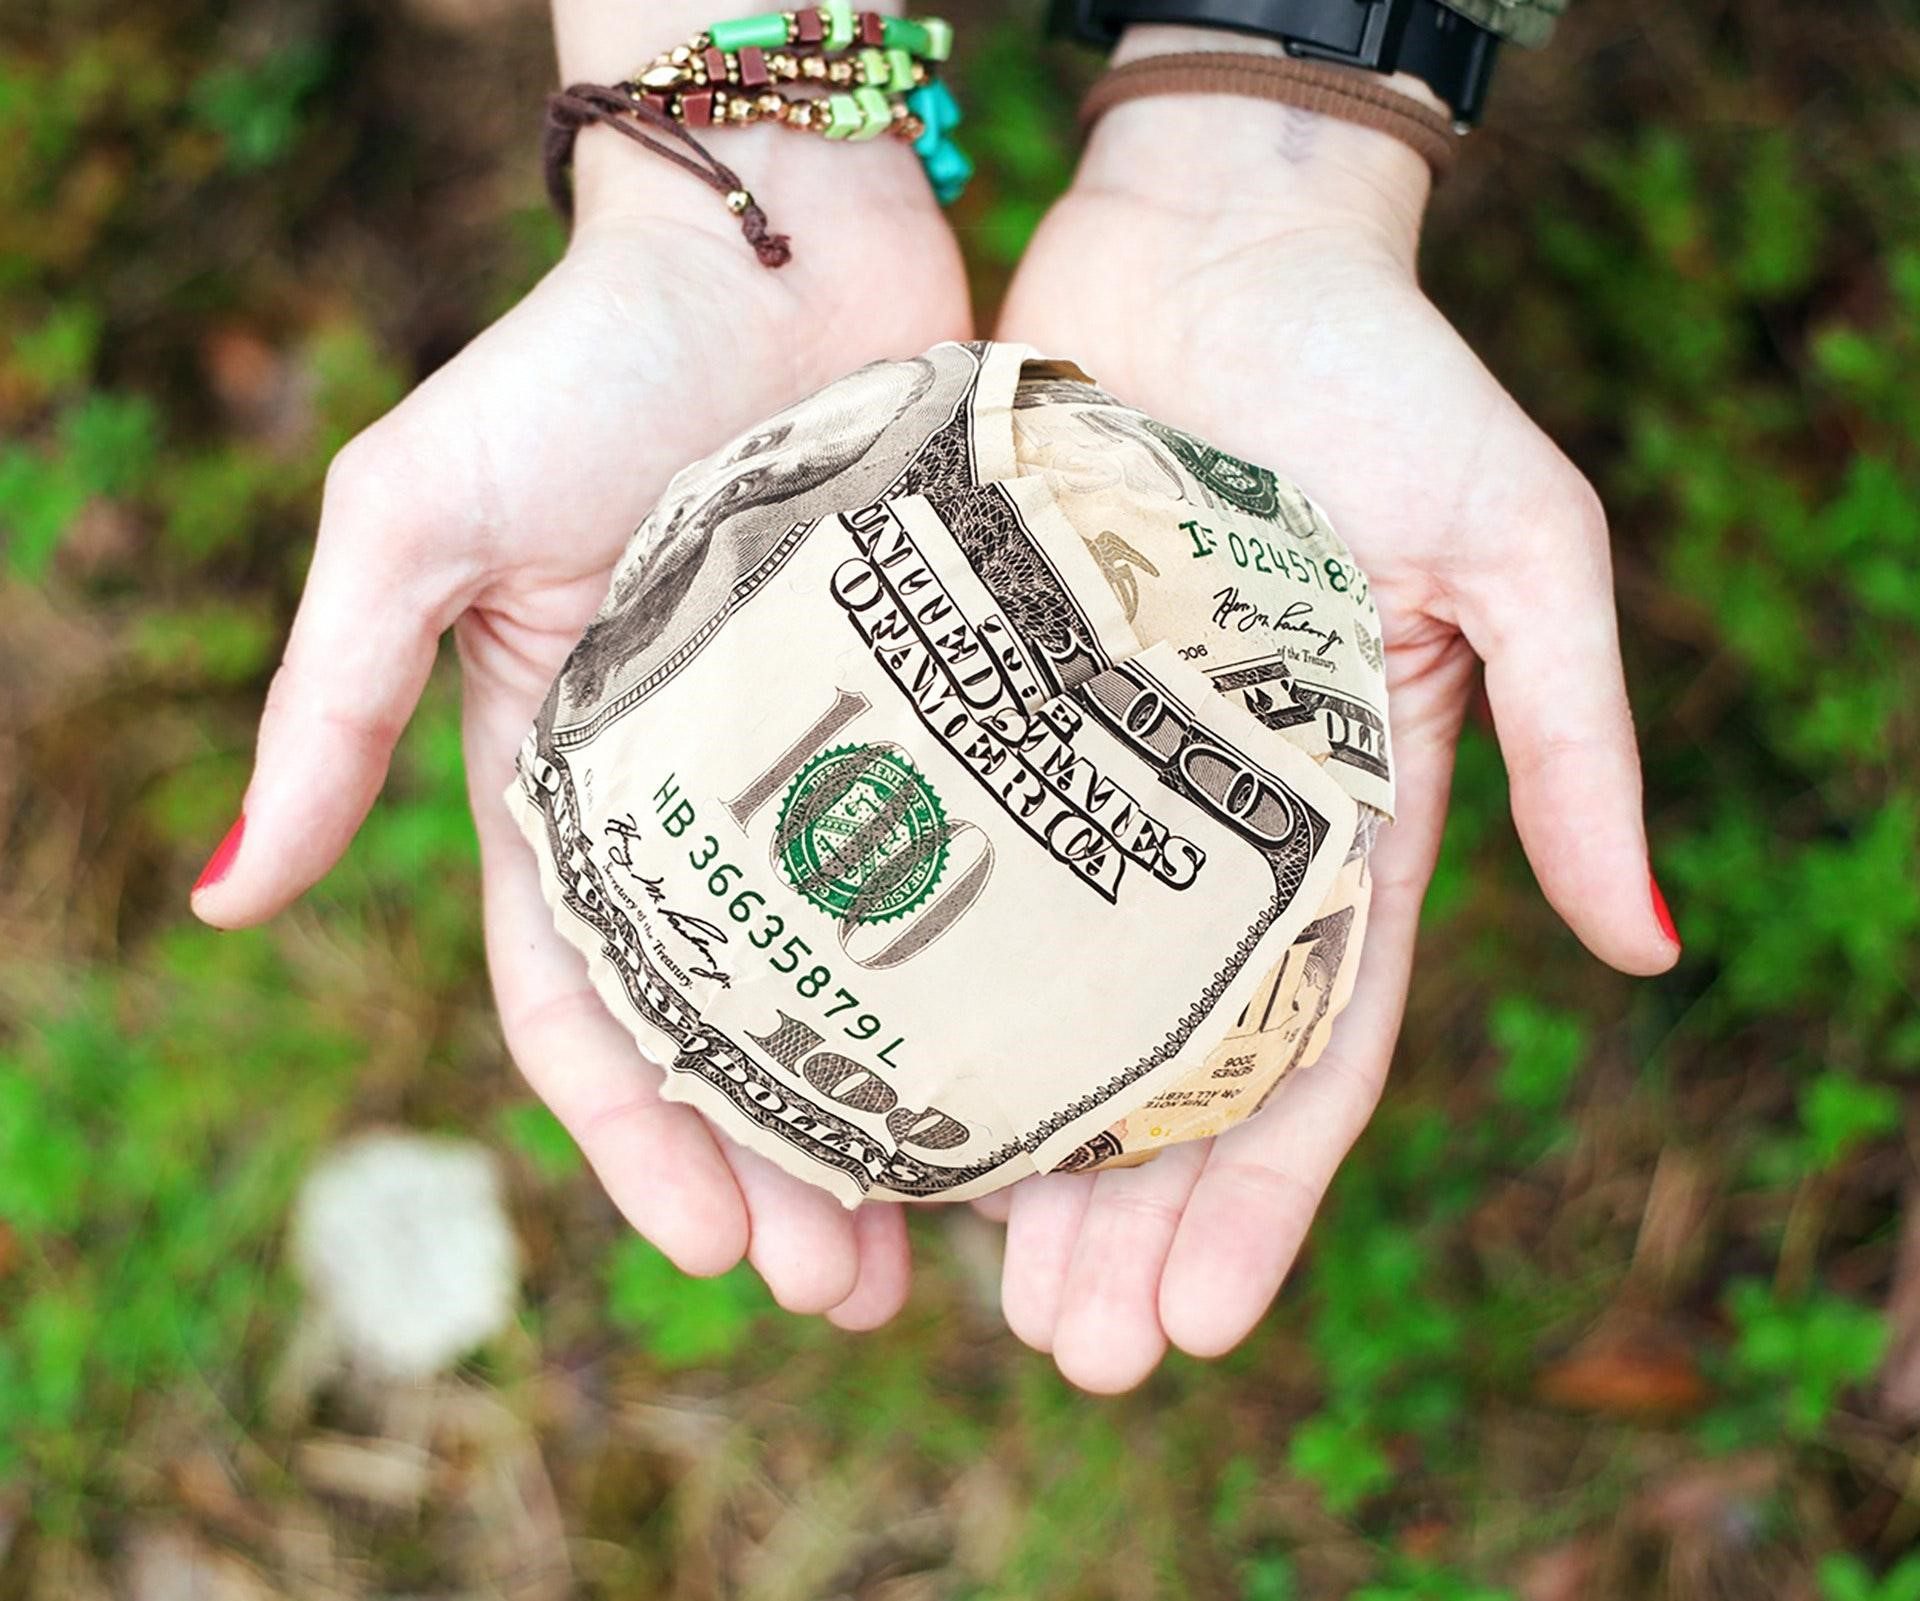 Can Crowdfunding Work for Your Small Business?